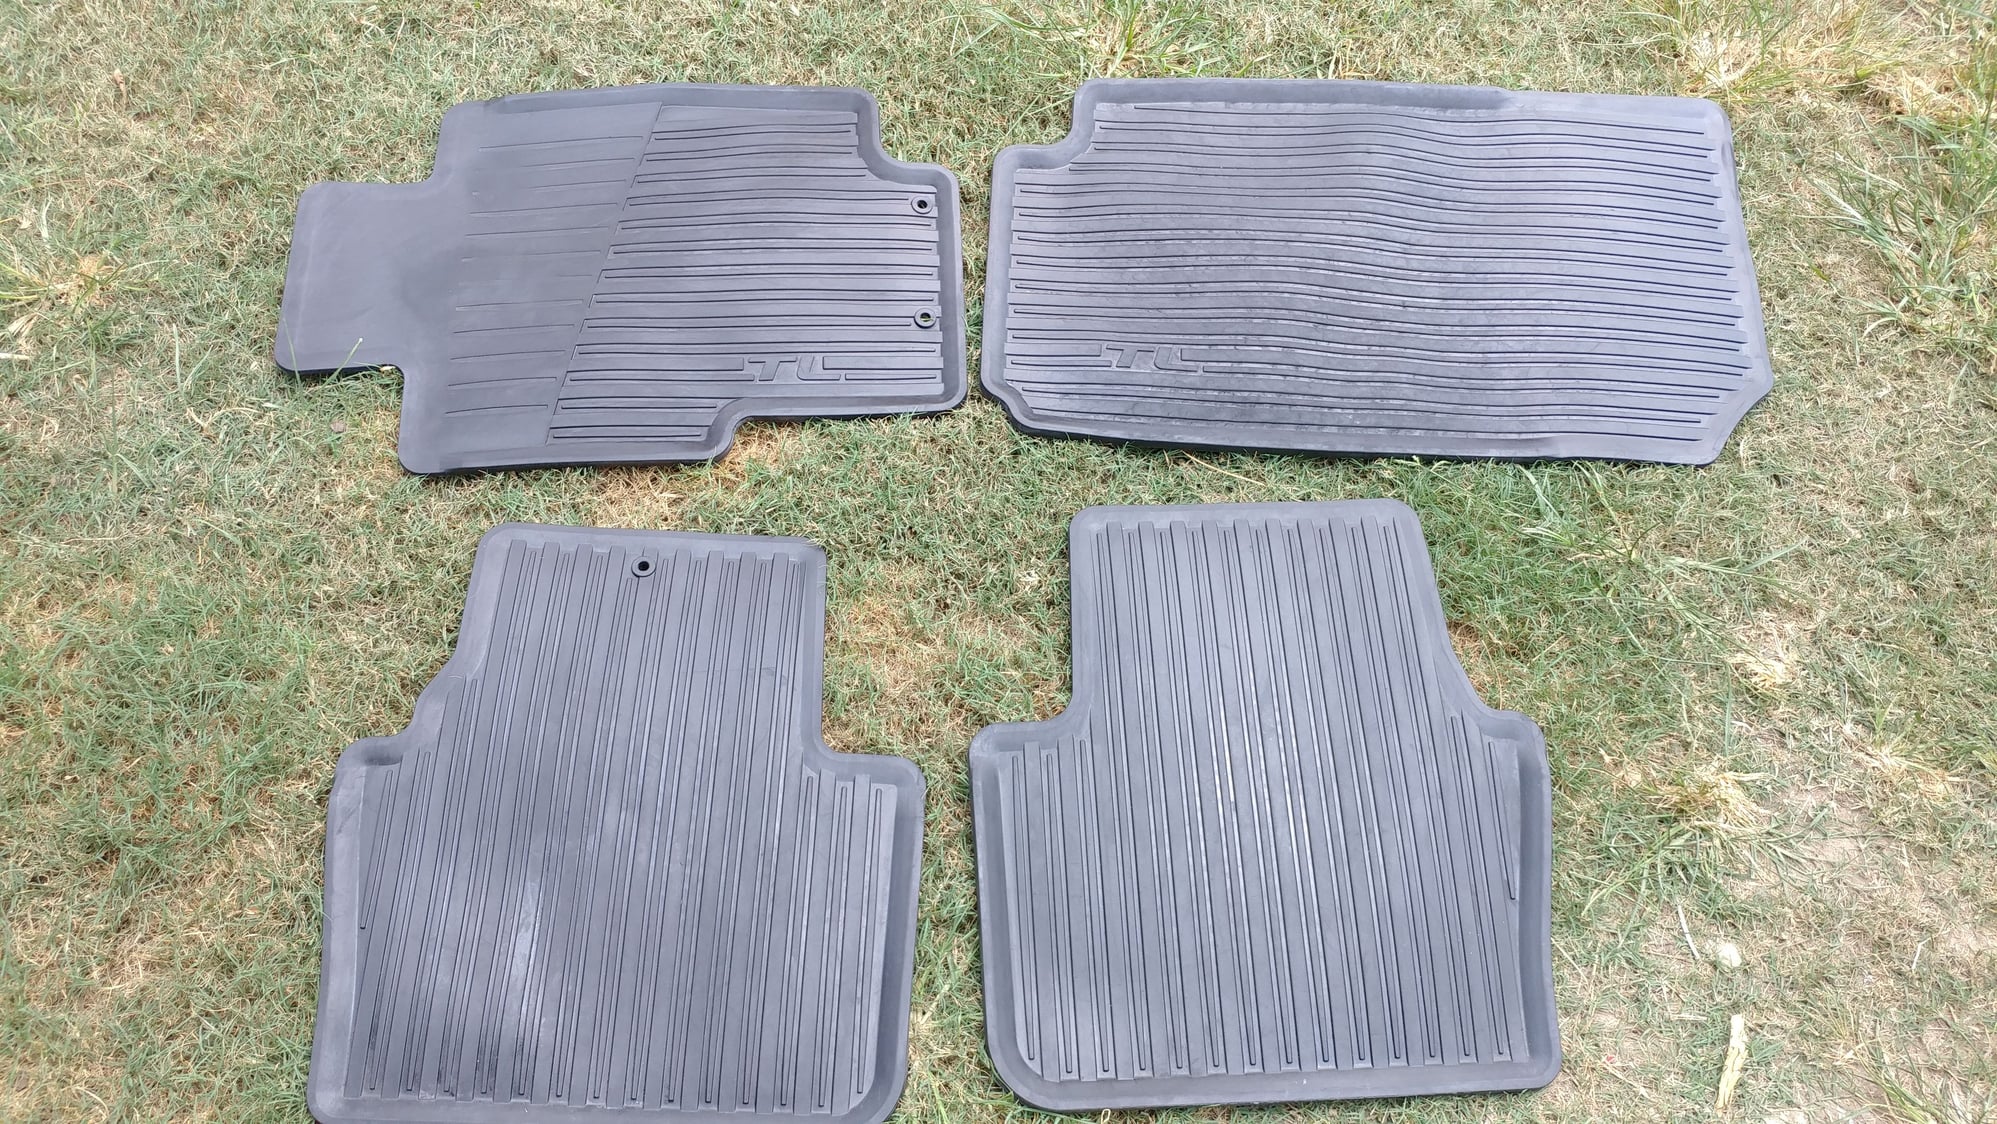 2008 Acura TL - OEM Trunk Tray and Floor Mats - Accessories - $100 - Houston, TX 77053, United States